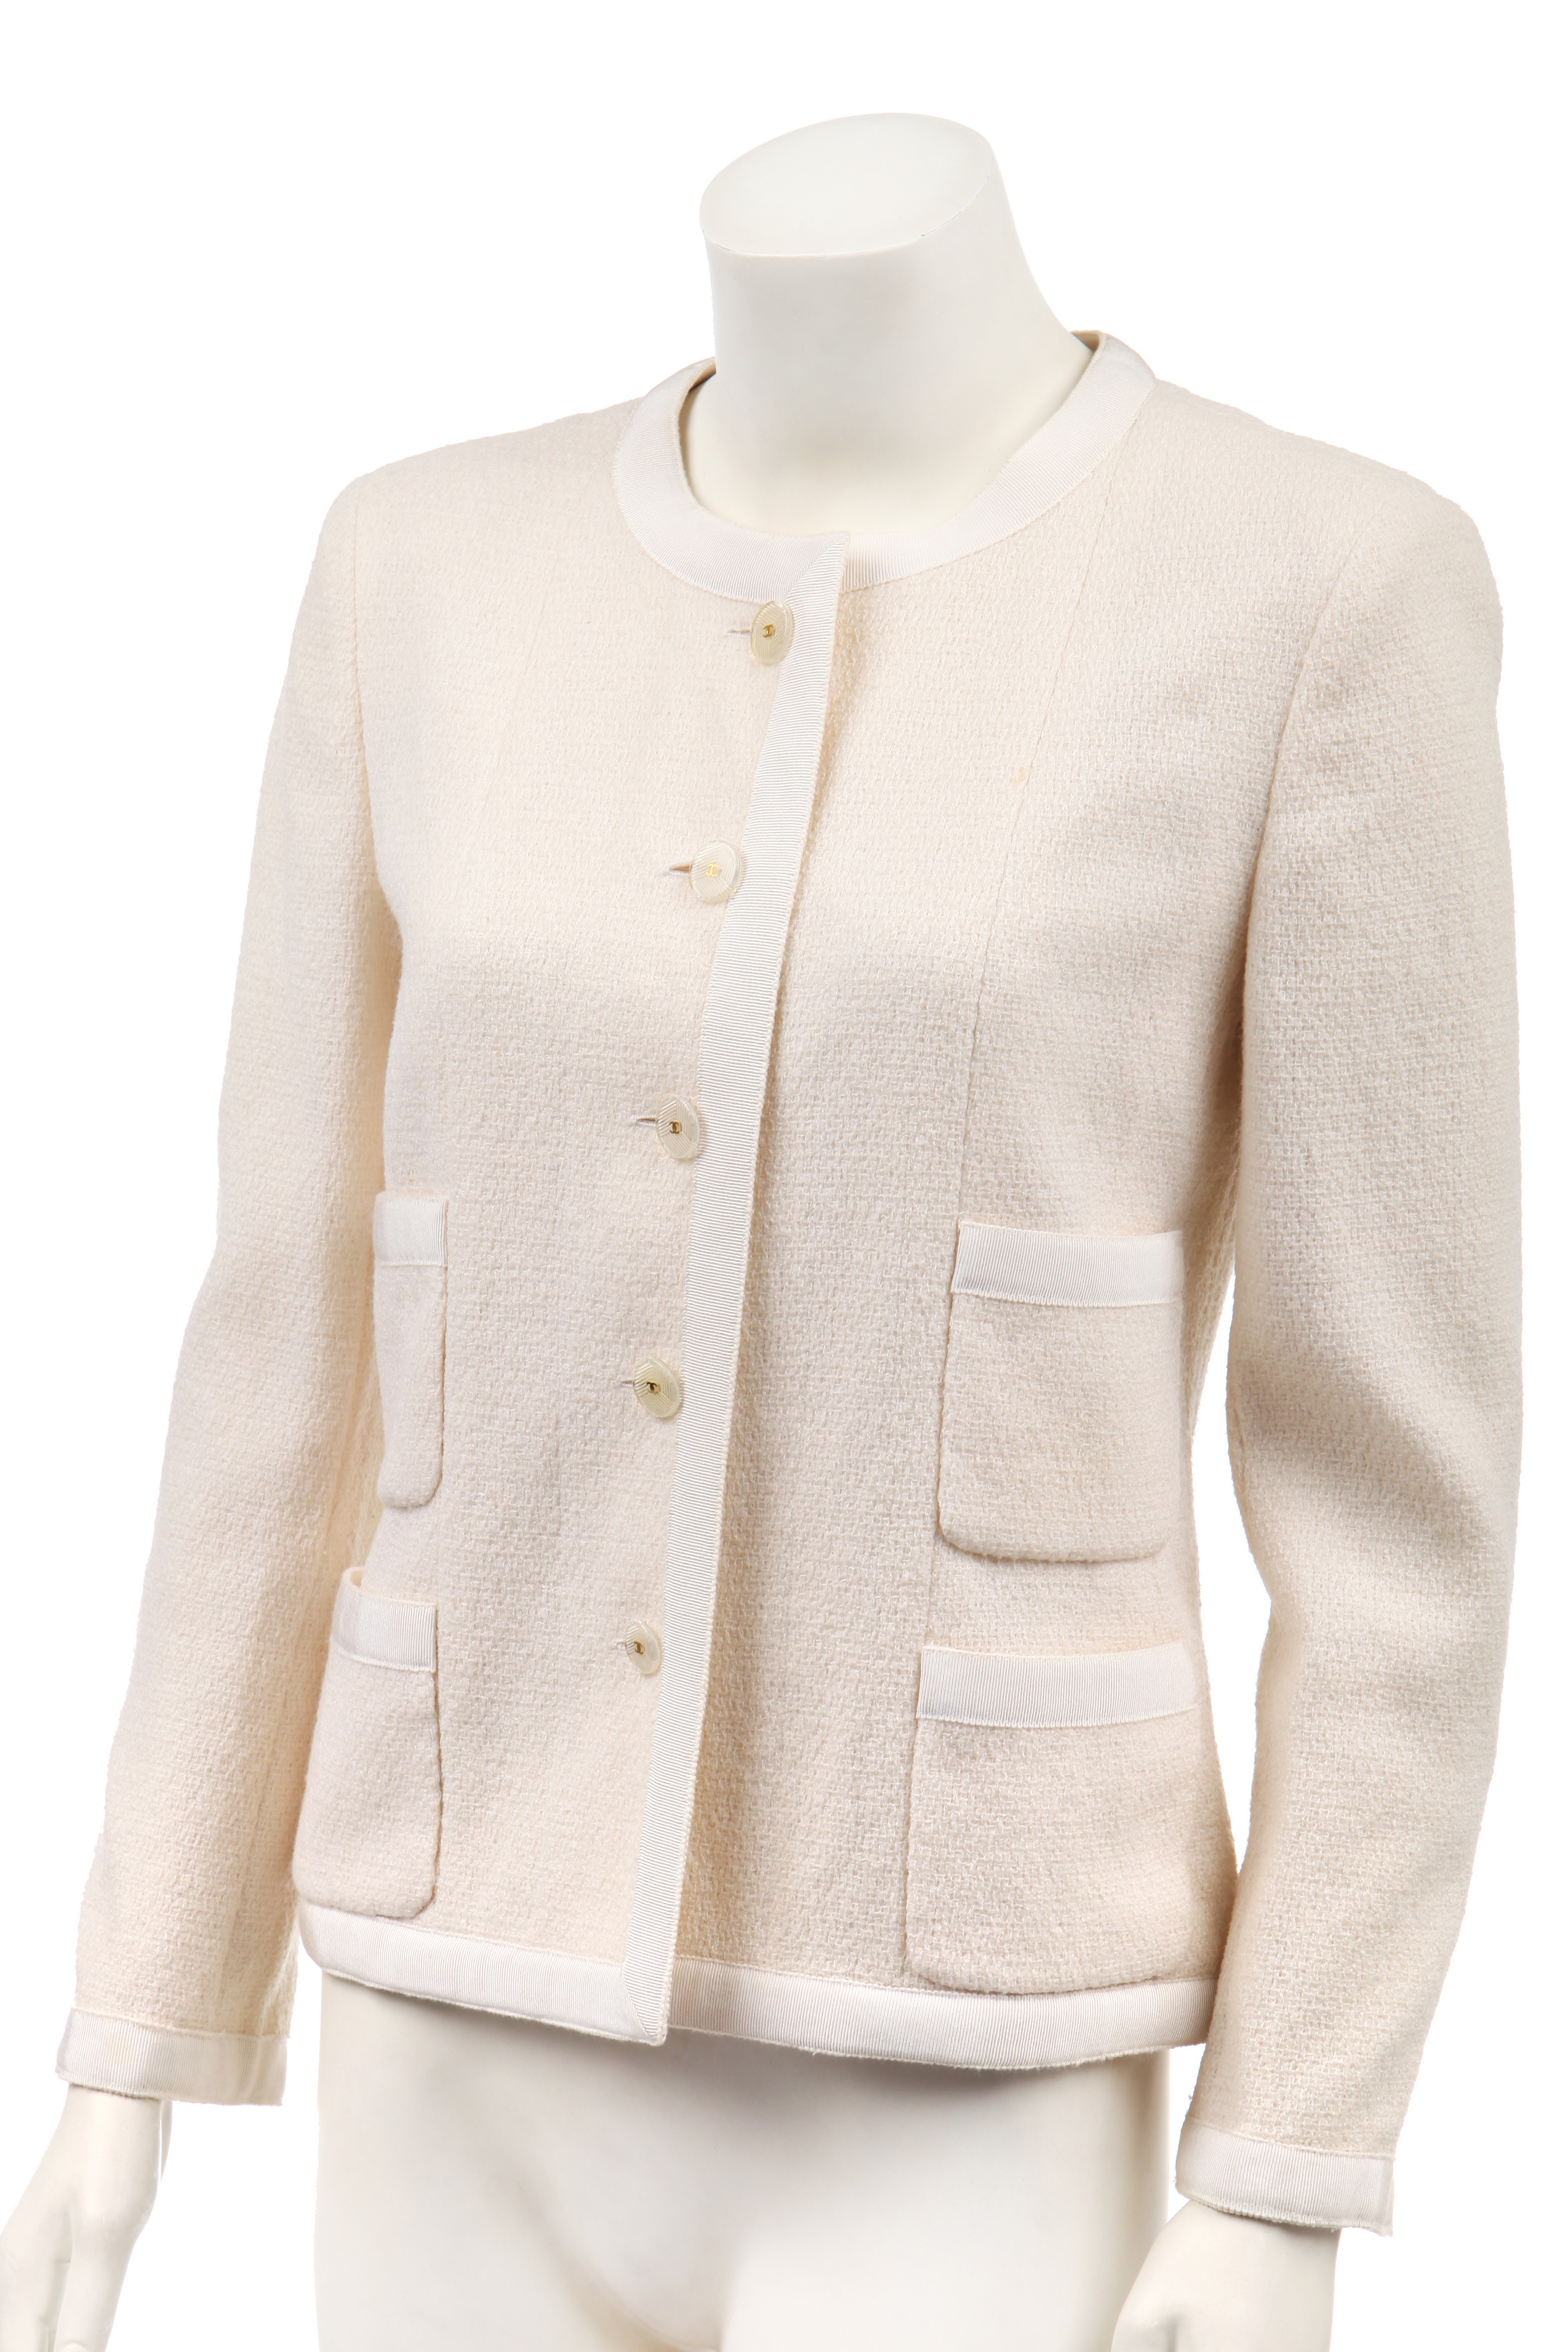 Sold at Auction: Chanel Trench Coat with Tweed Trim